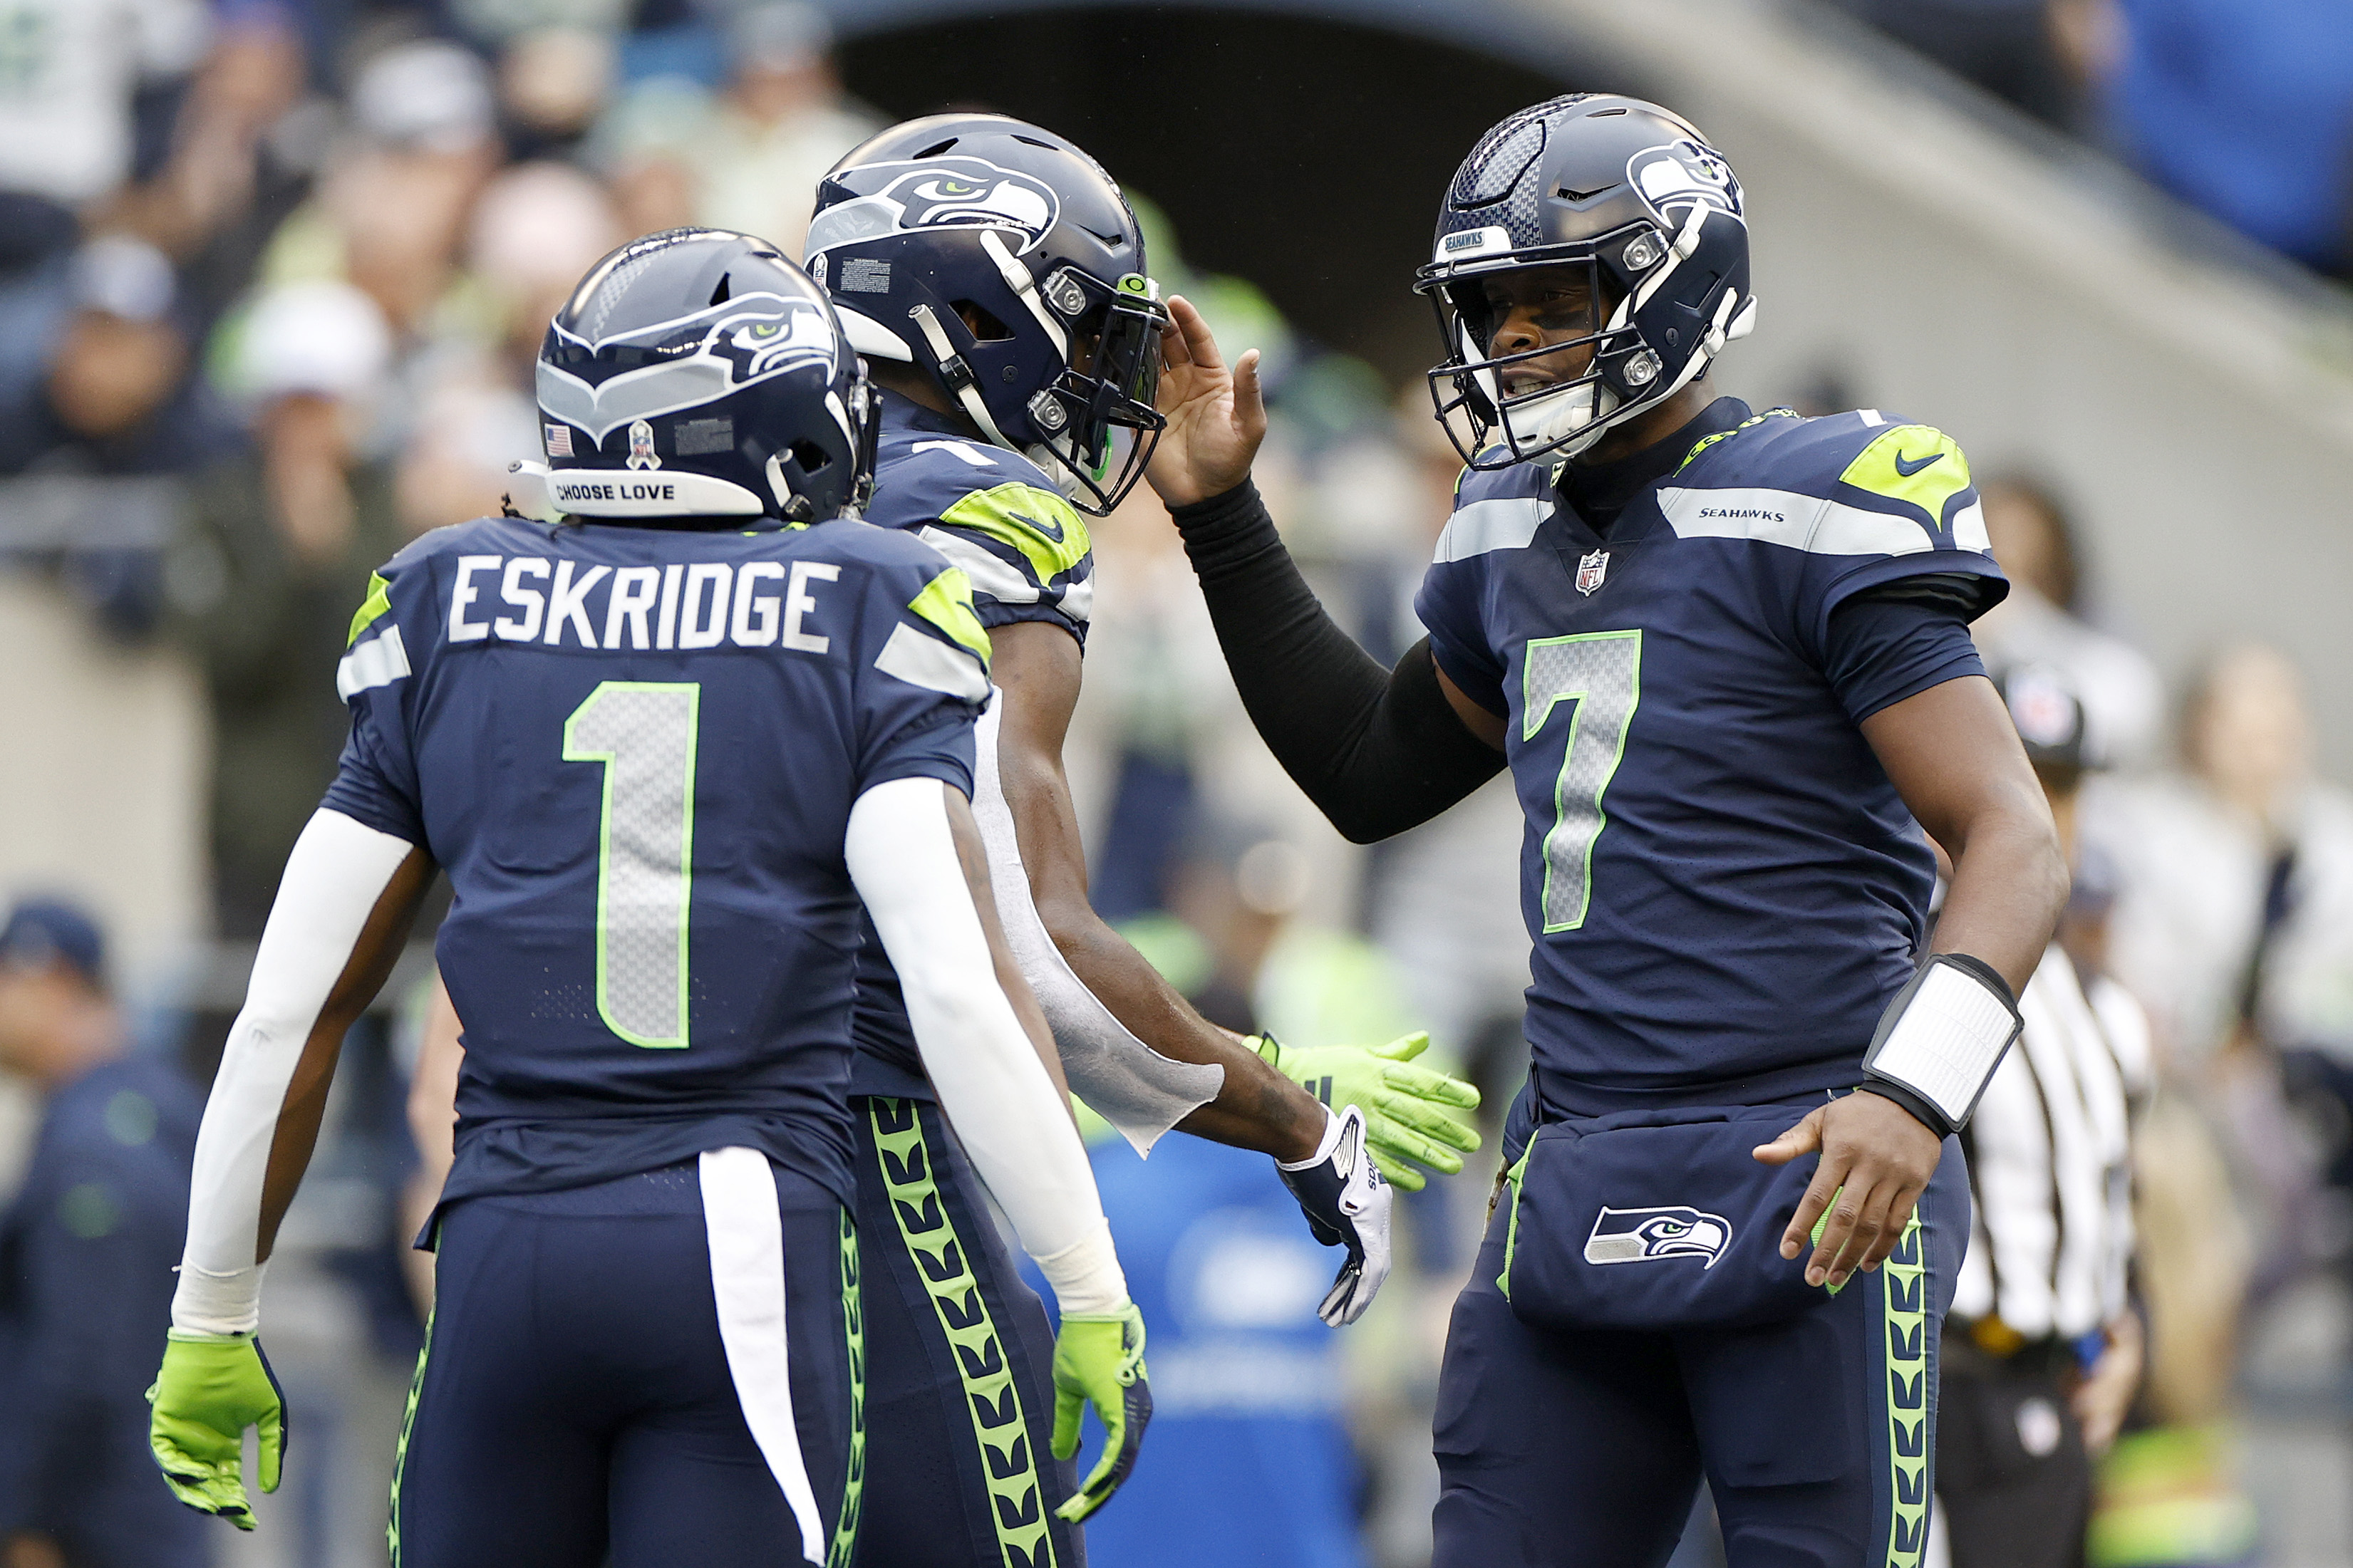 Players of the Seattle Seahawks celebrate after scoring a touchdown in the game against the New York Giants at Lumen Field in Seattle, Washington, October 30, 2022. /CFP